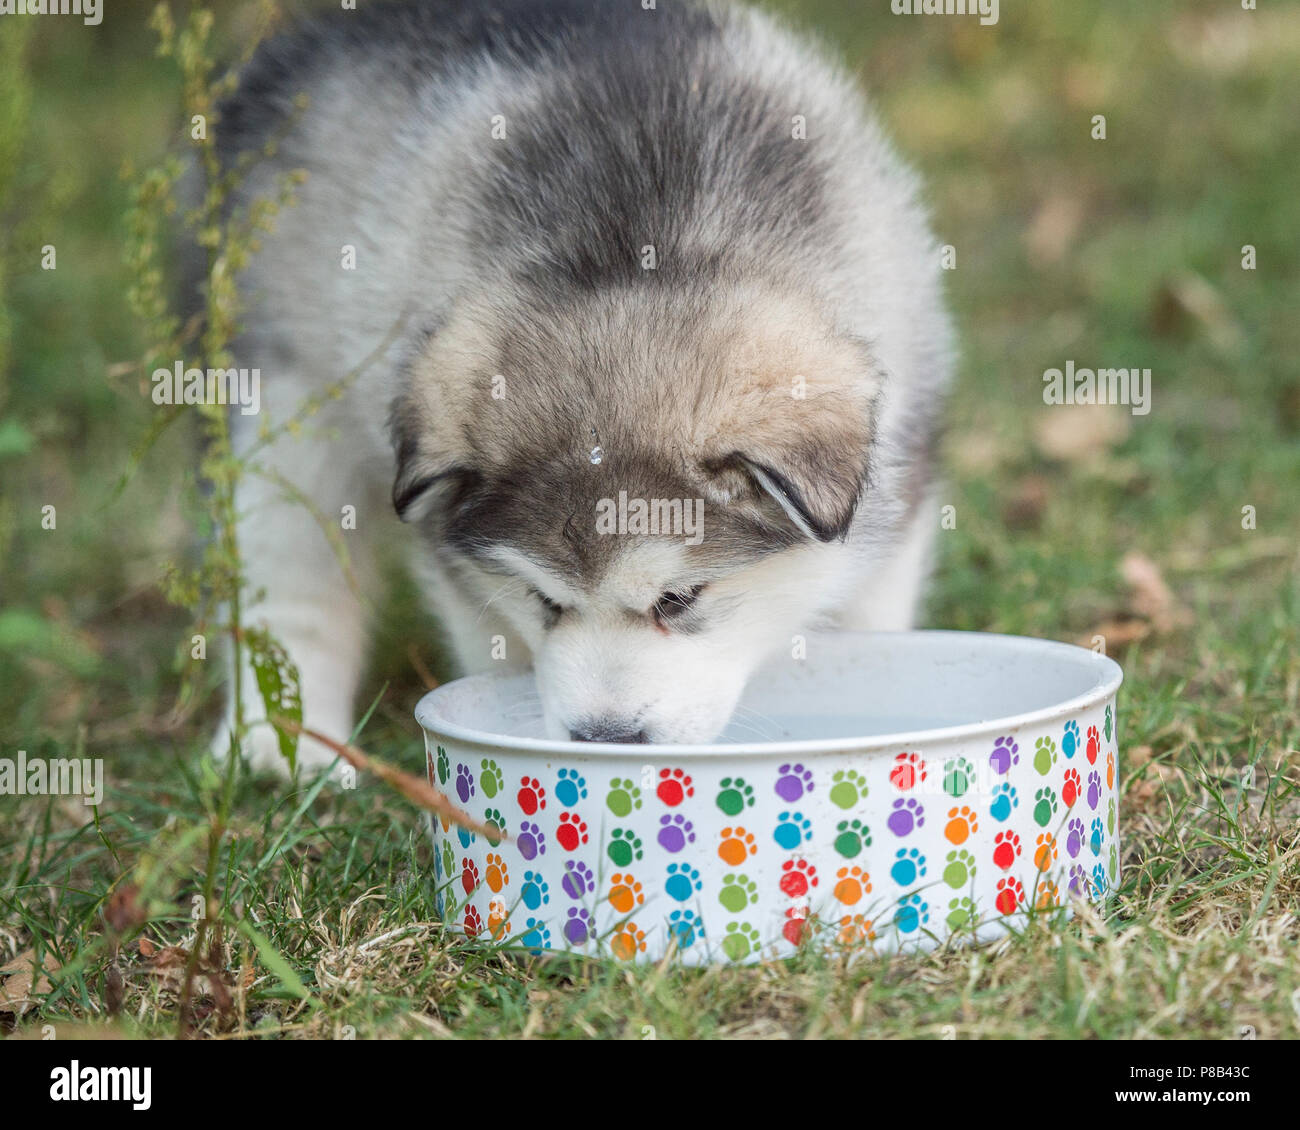 puppy drinking from water bowl Stock Photo